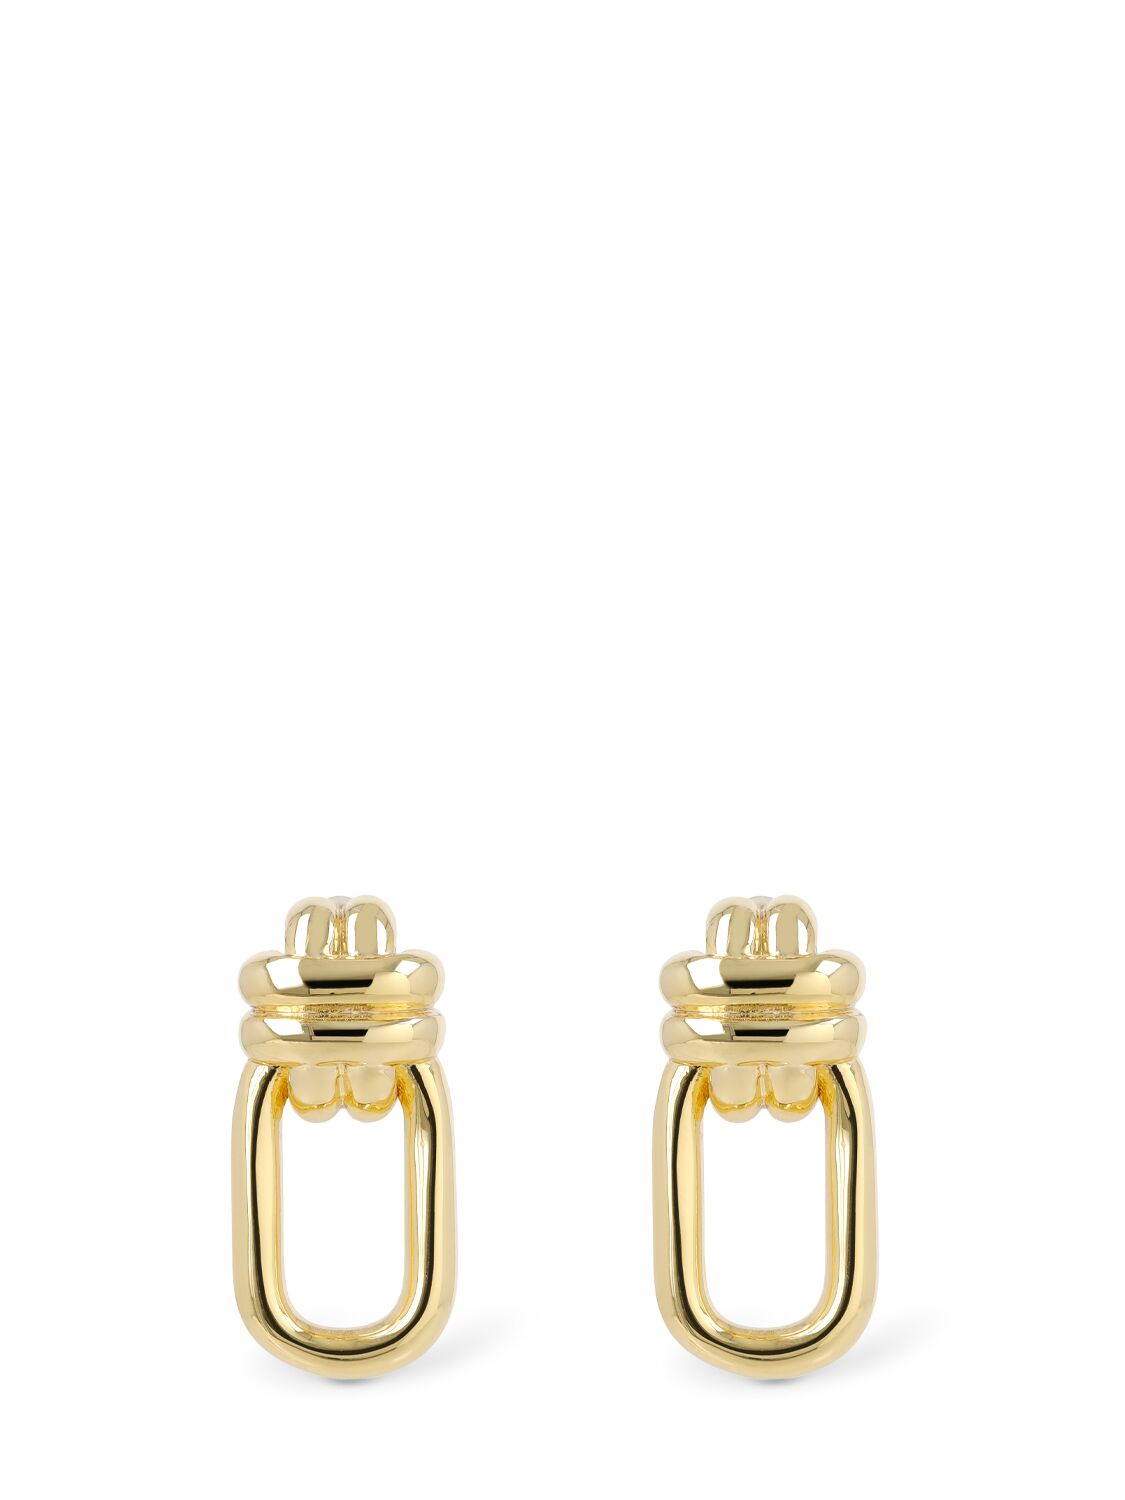 Image of Signature Link Double Cross Earrings